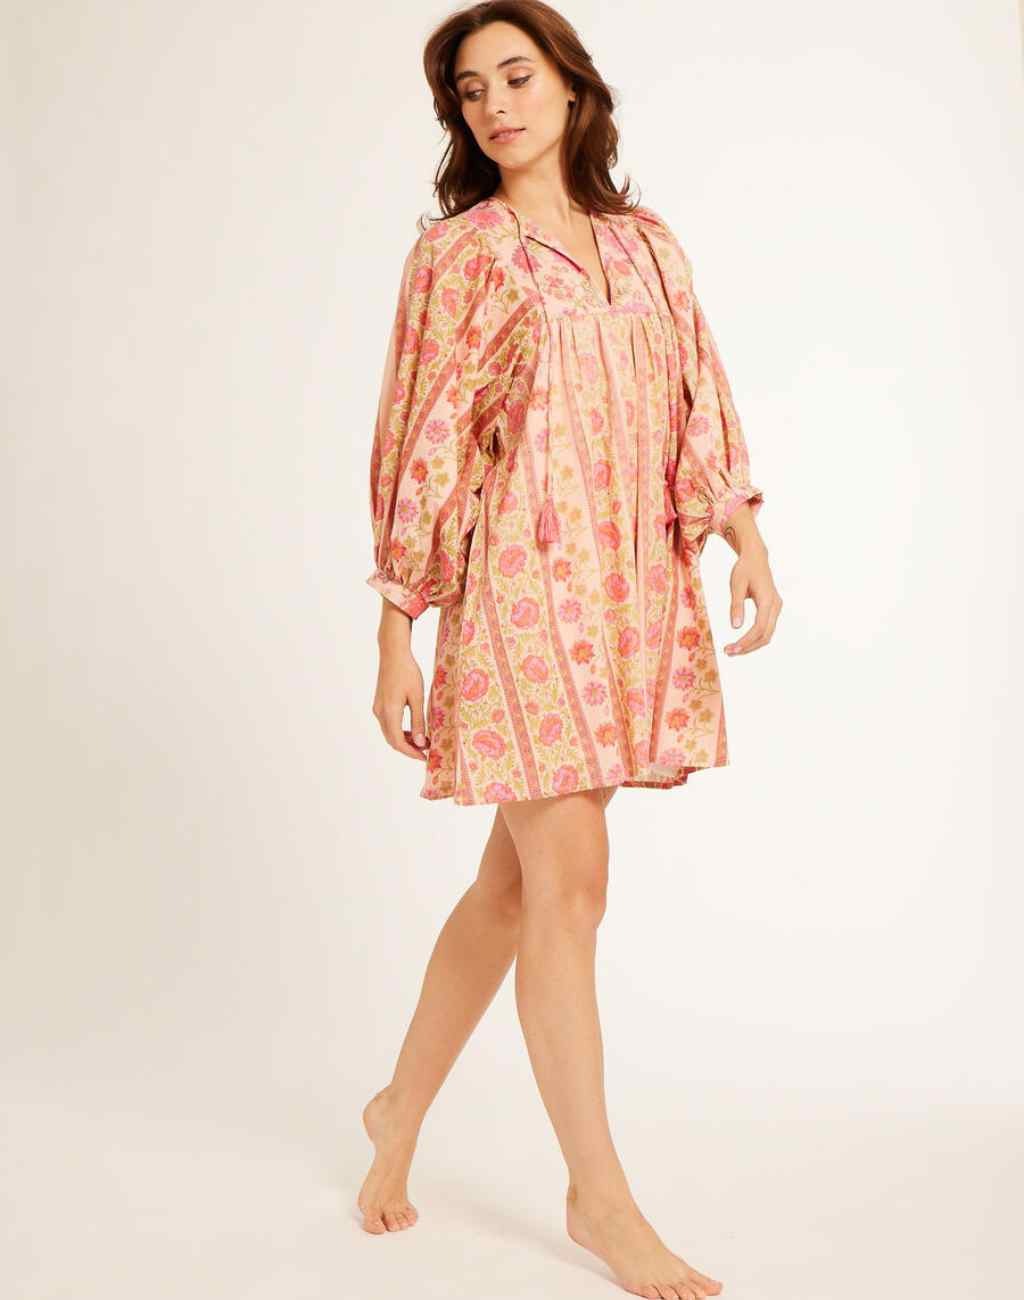 Daisy Dress in Desert Bloom with Billowy Sleeves and Tassel Ties - Visit Nifty Mille 